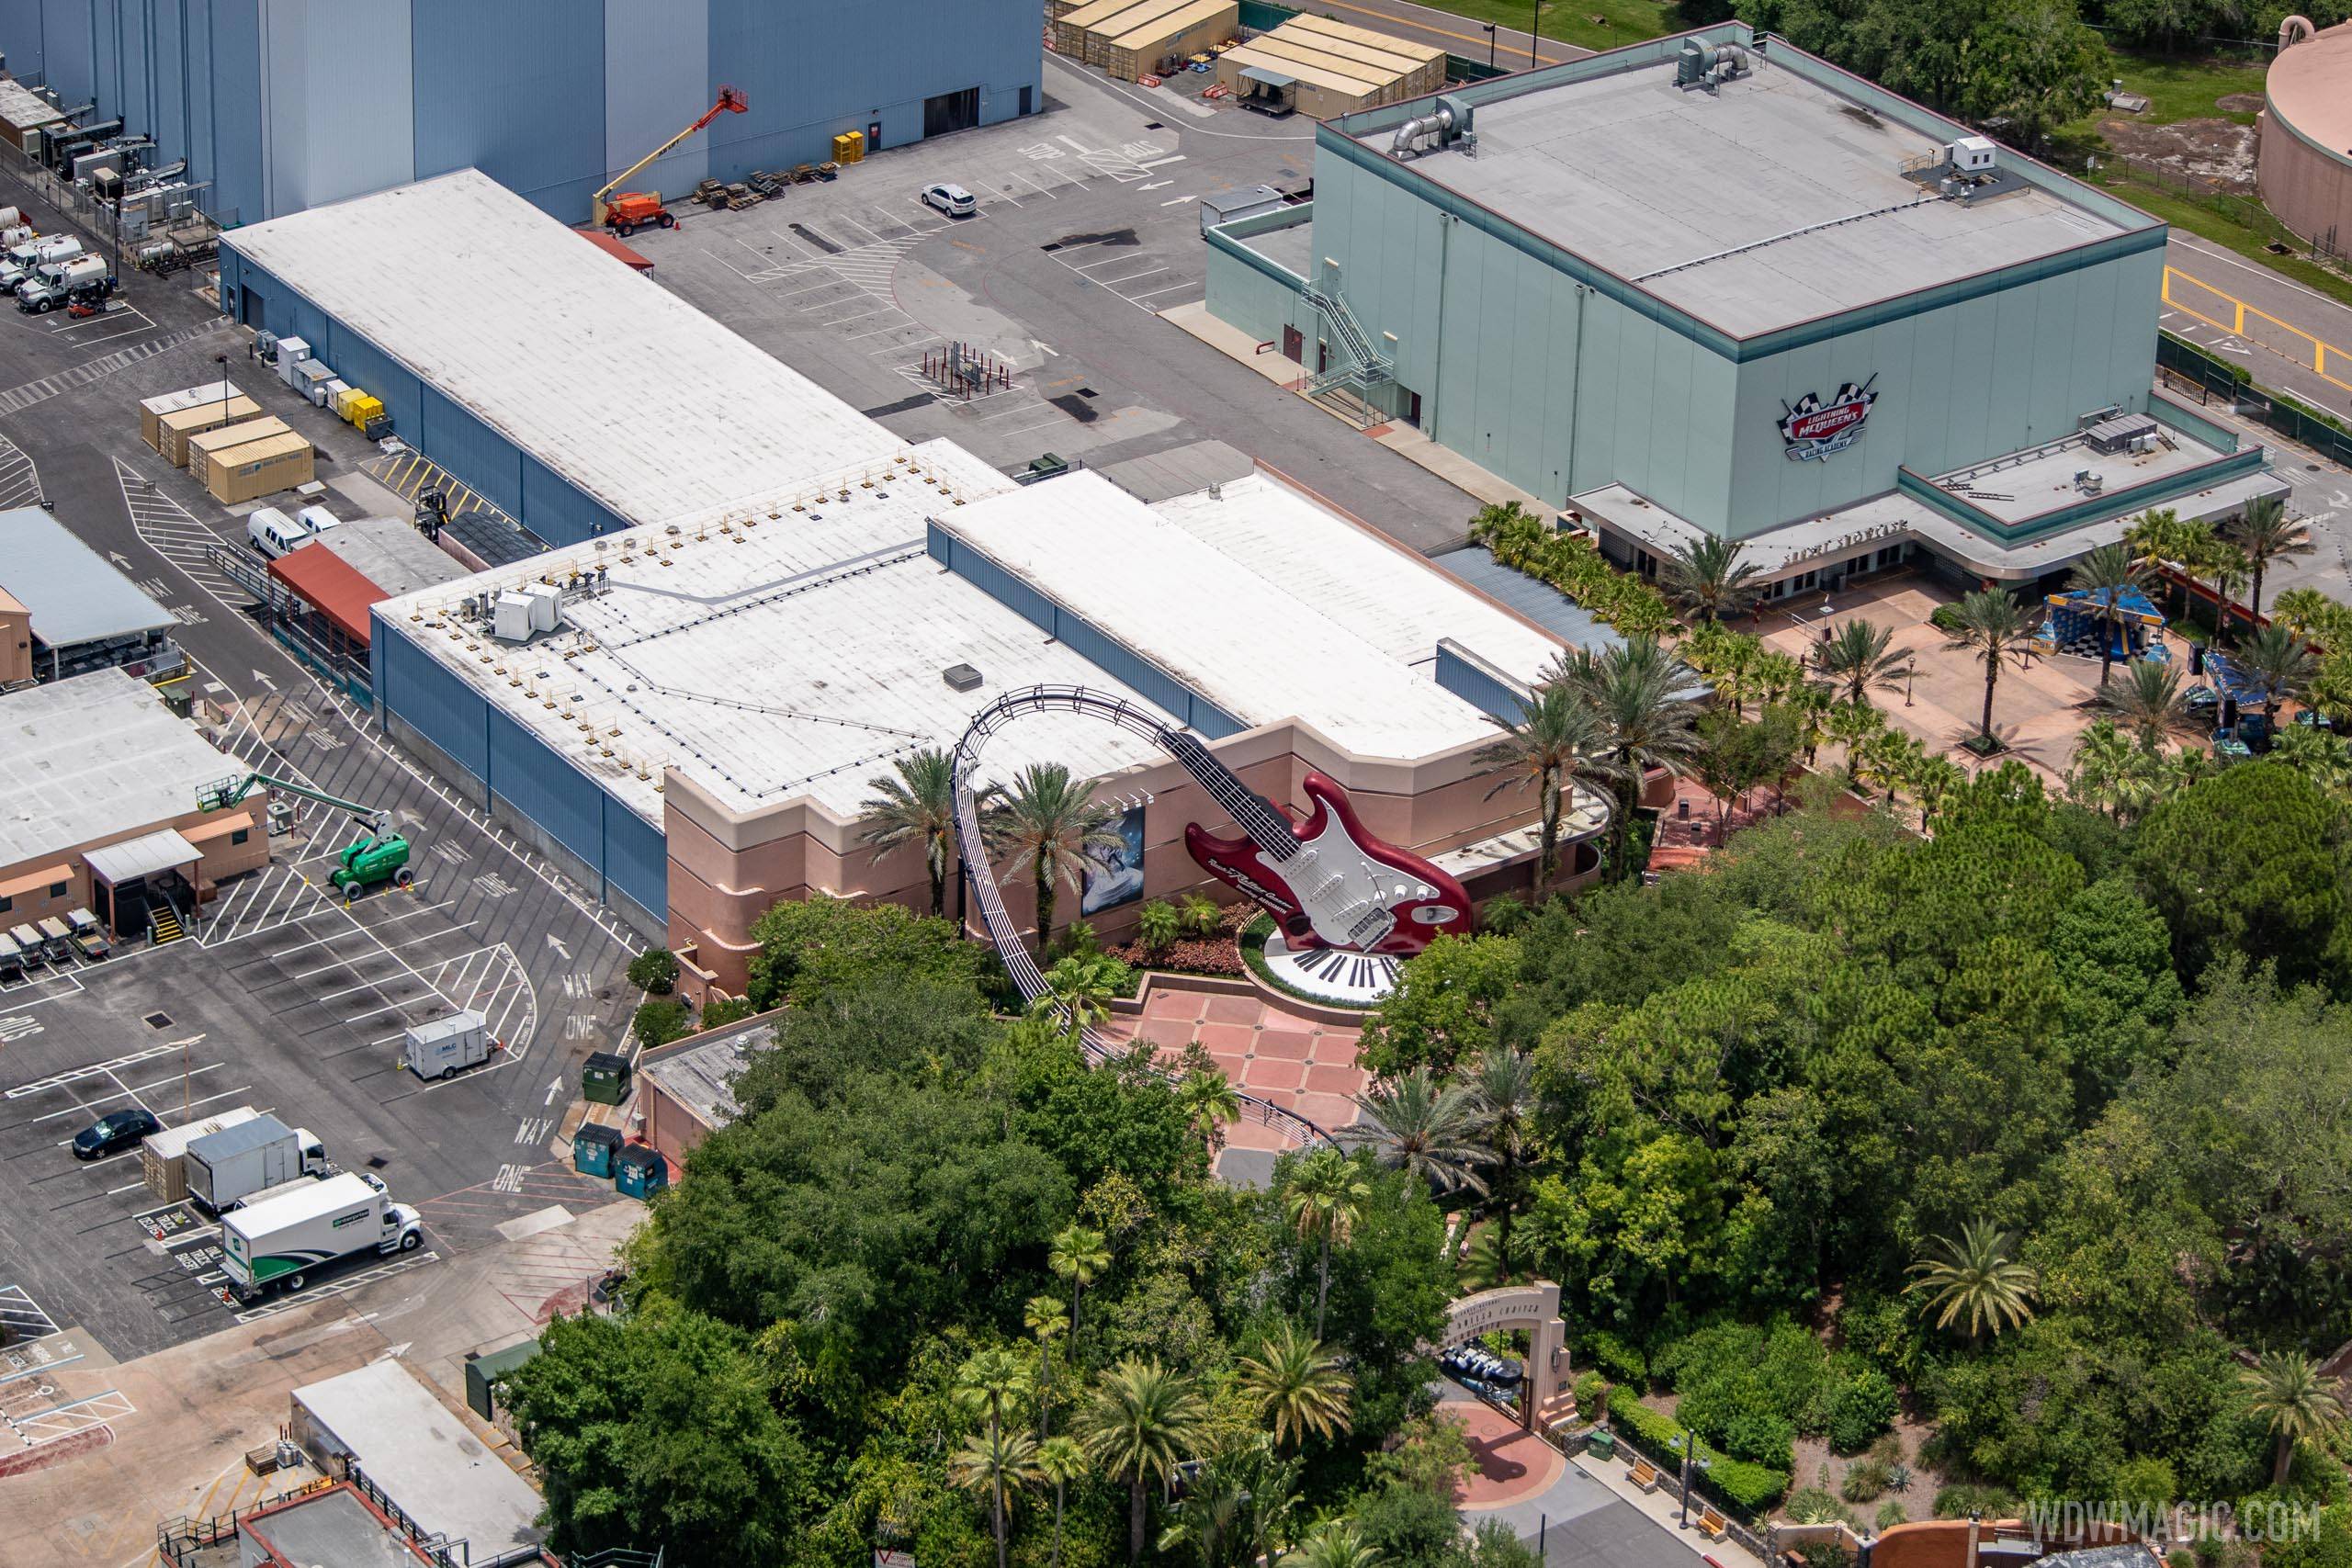 Rock 'n' Roller Coaster was closed for a couple of months in 2023